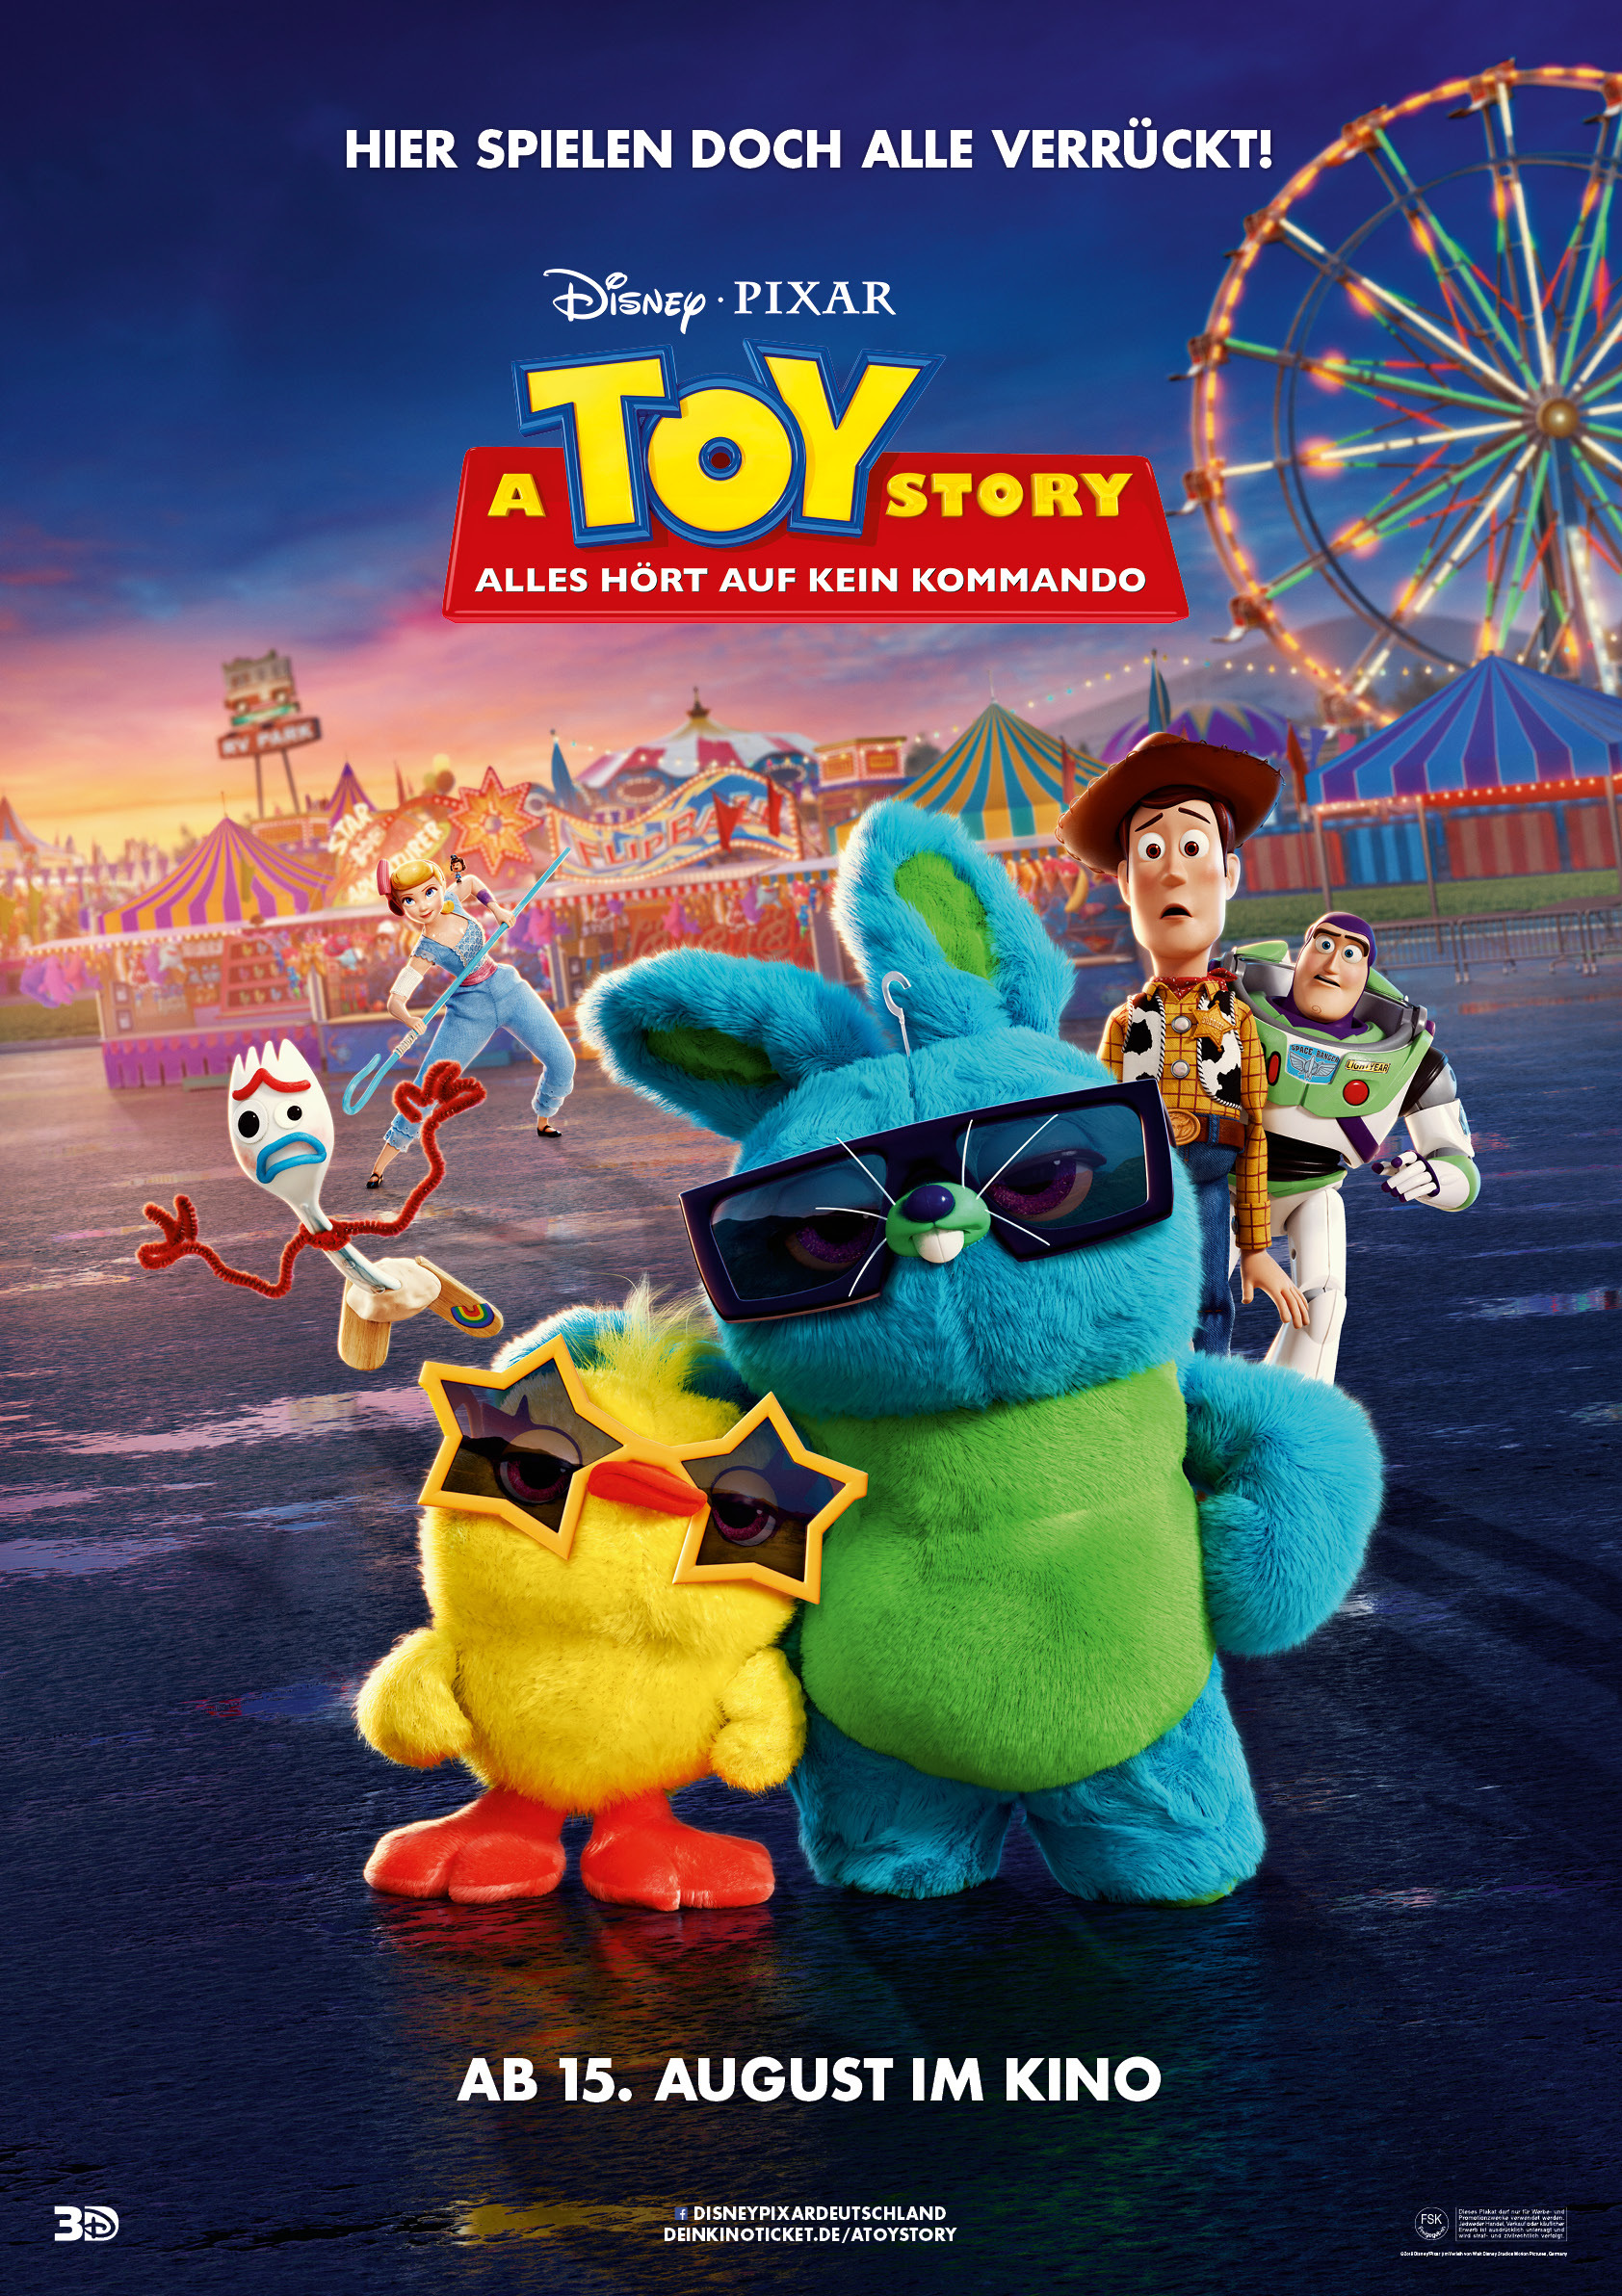 Mega Sized Movie Poster Image for Toy Story 4 (#21 of 29)